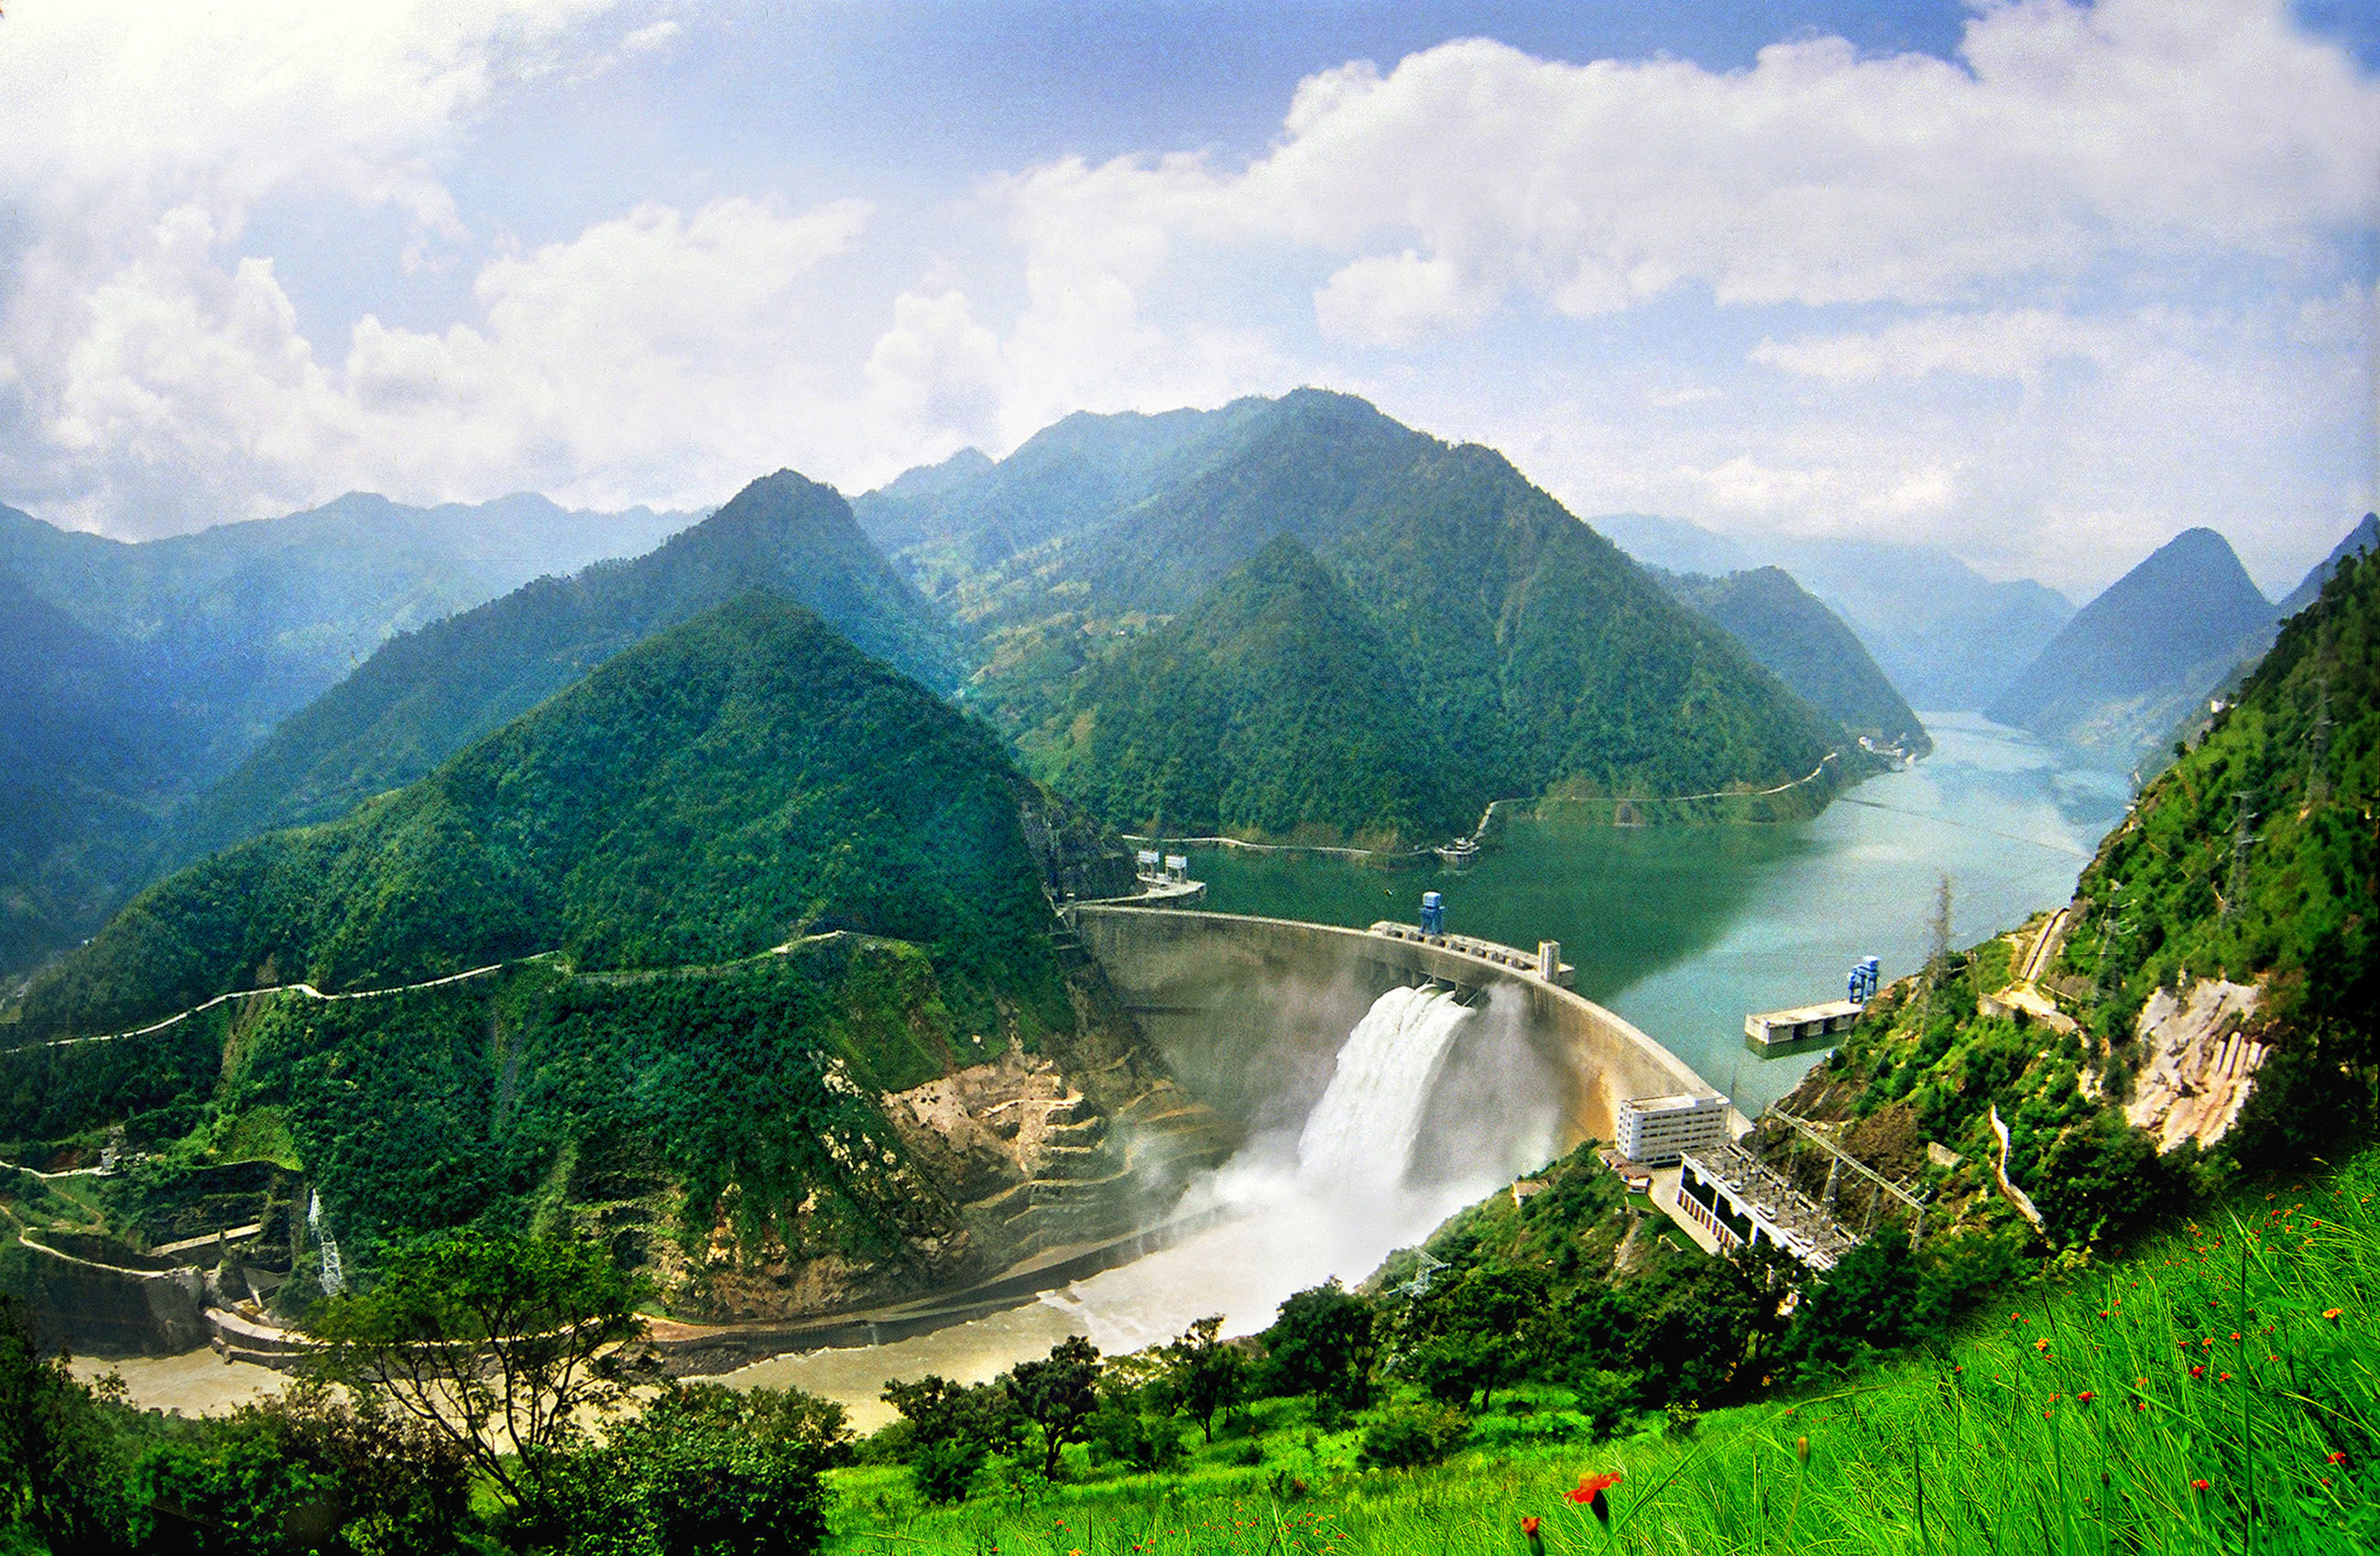 Changlong Mountain Pumped Storage Power Station